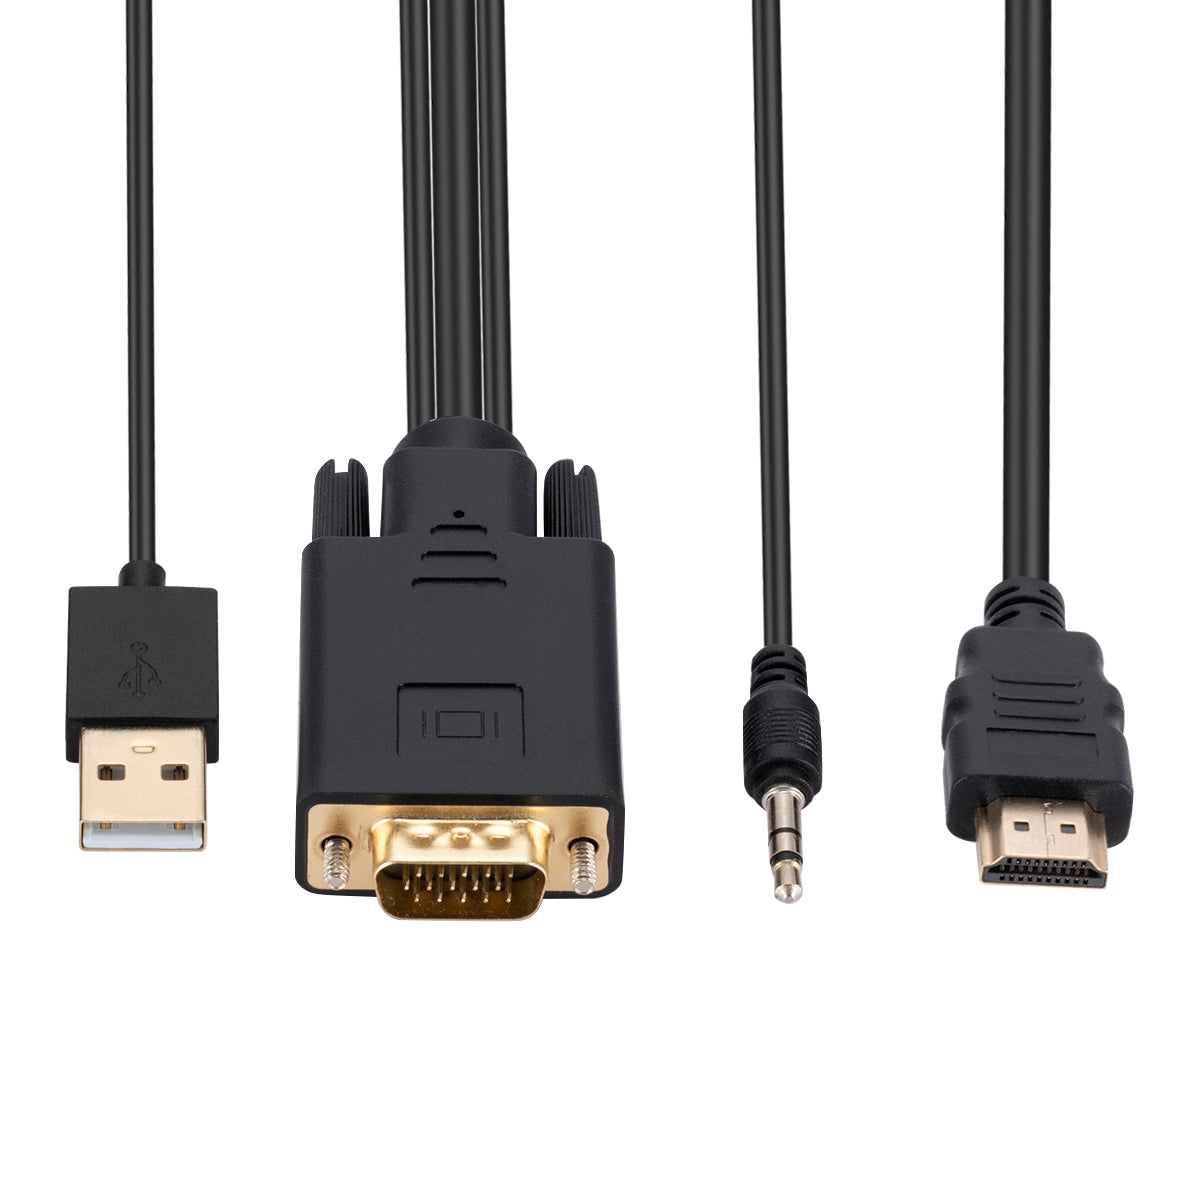 1.8m VGA to HDMI Adapter Cable with Audio, USB Power Cables, Portable VGA to HDMI Converter for Monitor with VGA, Projector, TV